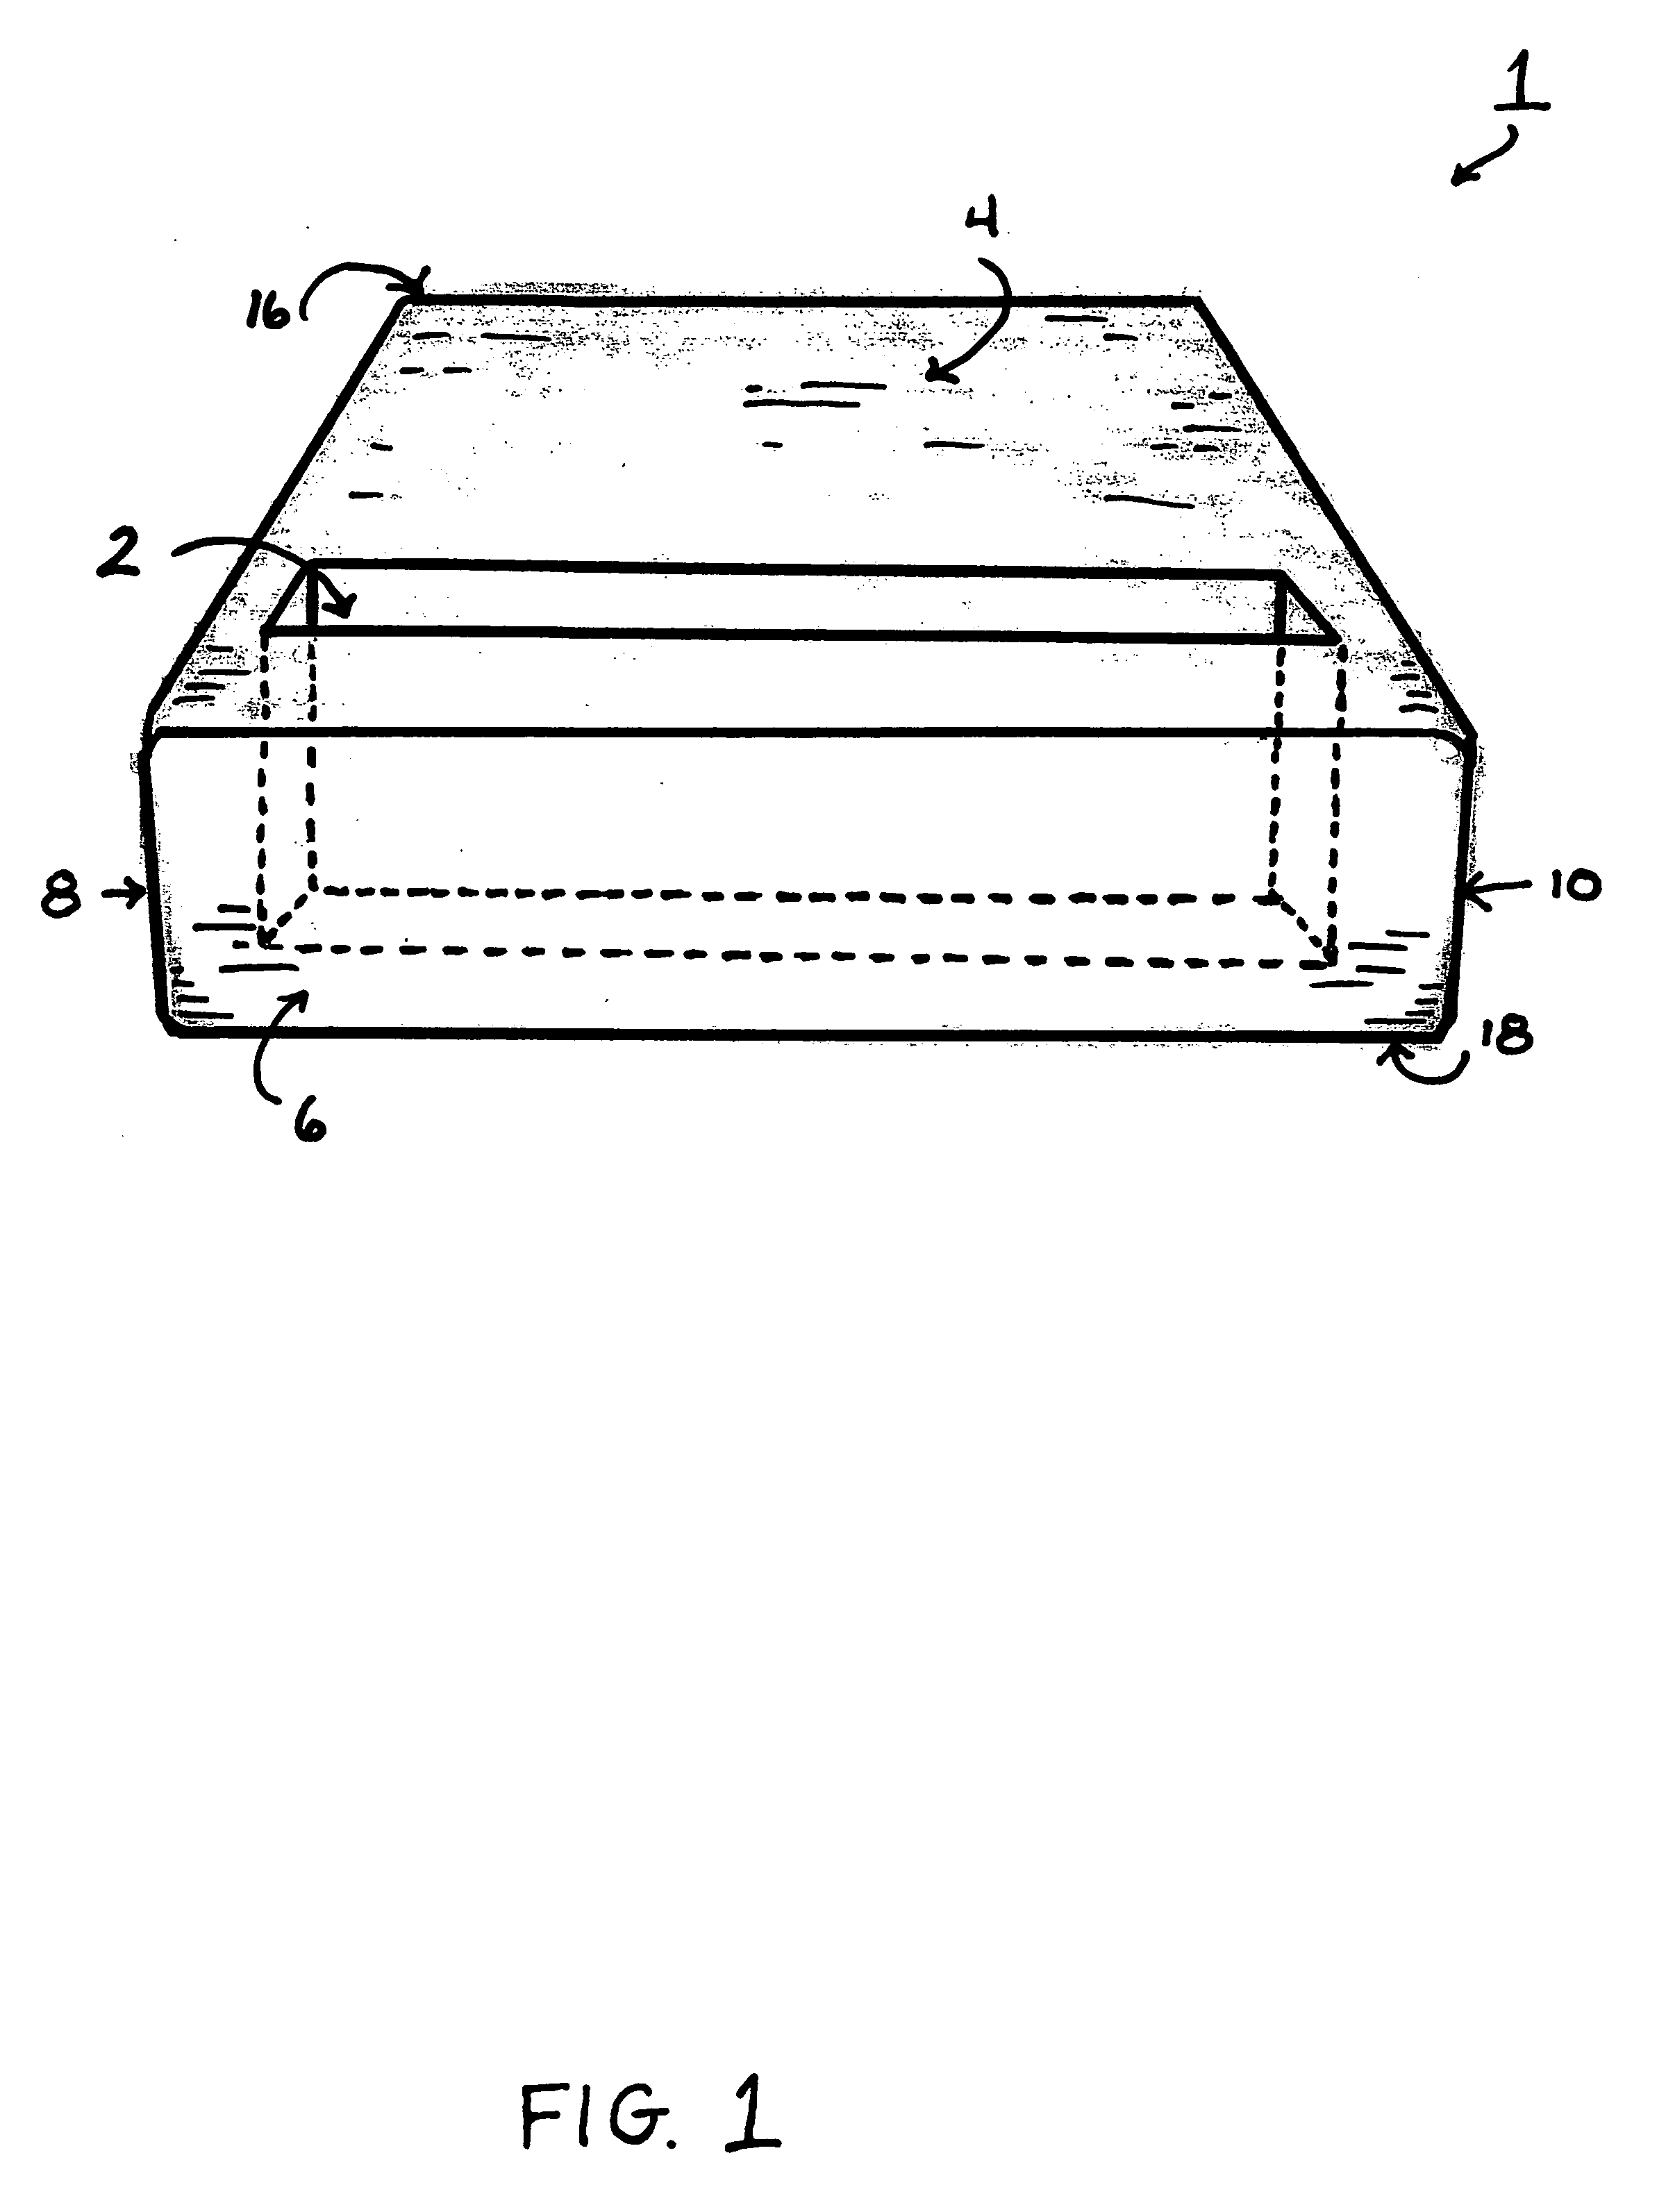 Mattress with breast support panels